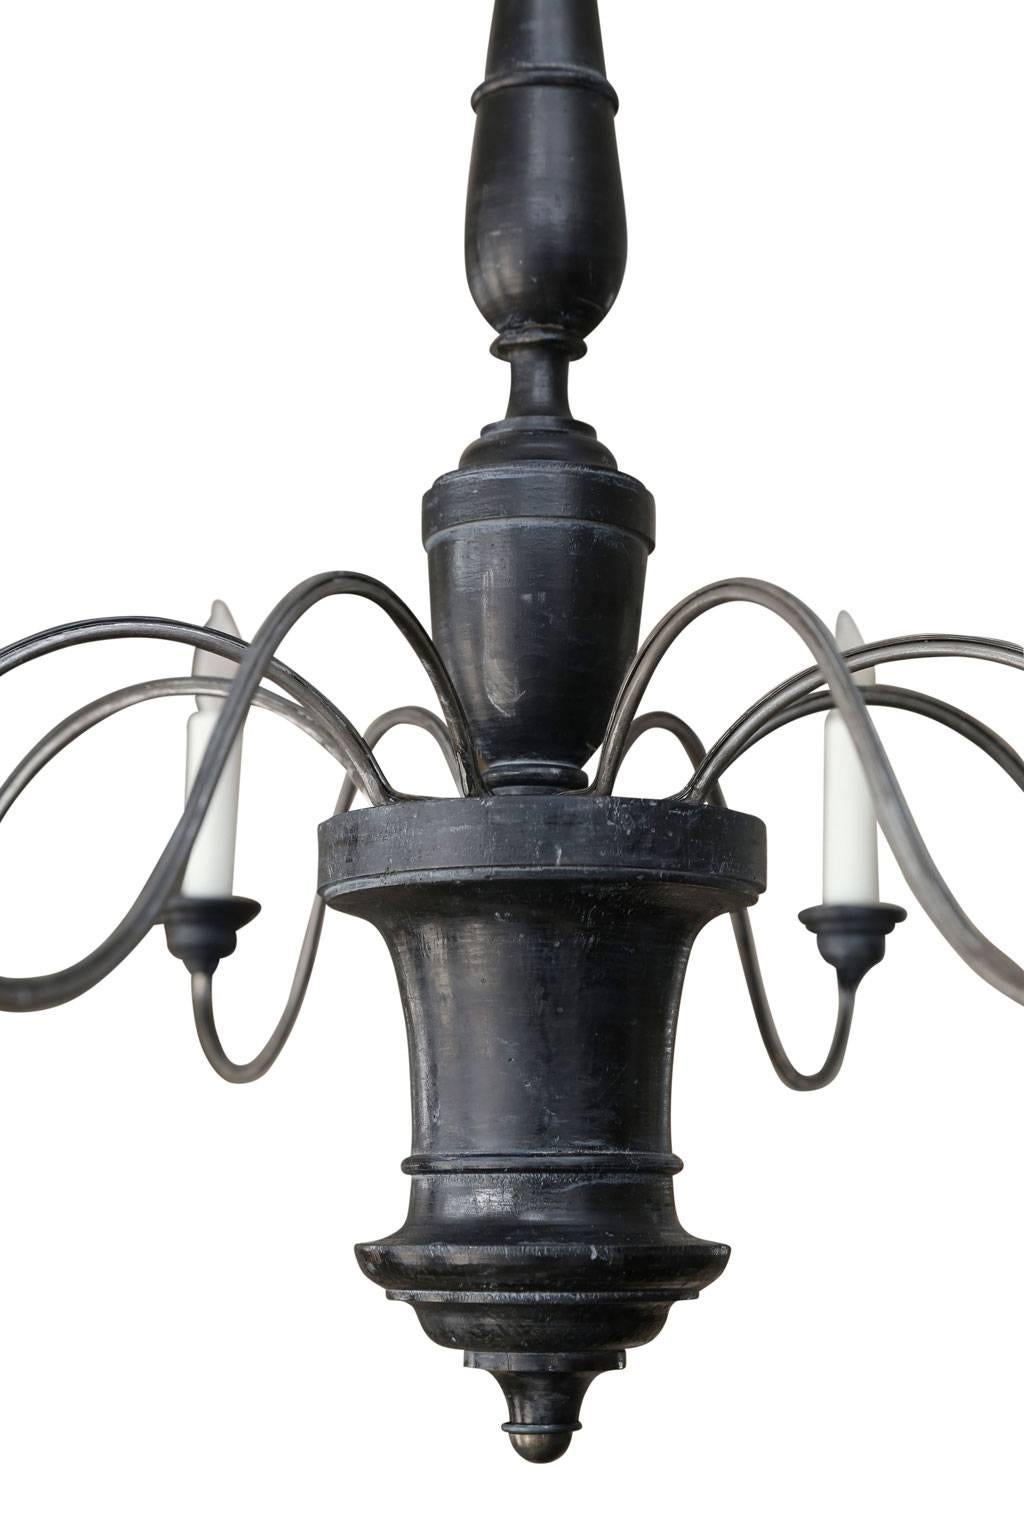 Ebonized wood and iron chandelier from Genoa, Italy. Chandelier consists of a turned wooden body (circa 1800-1820) in original ebonized finish, eight later undulating iron arms and wooden bobeche cups. Newly-wired for use within the USA using all UL